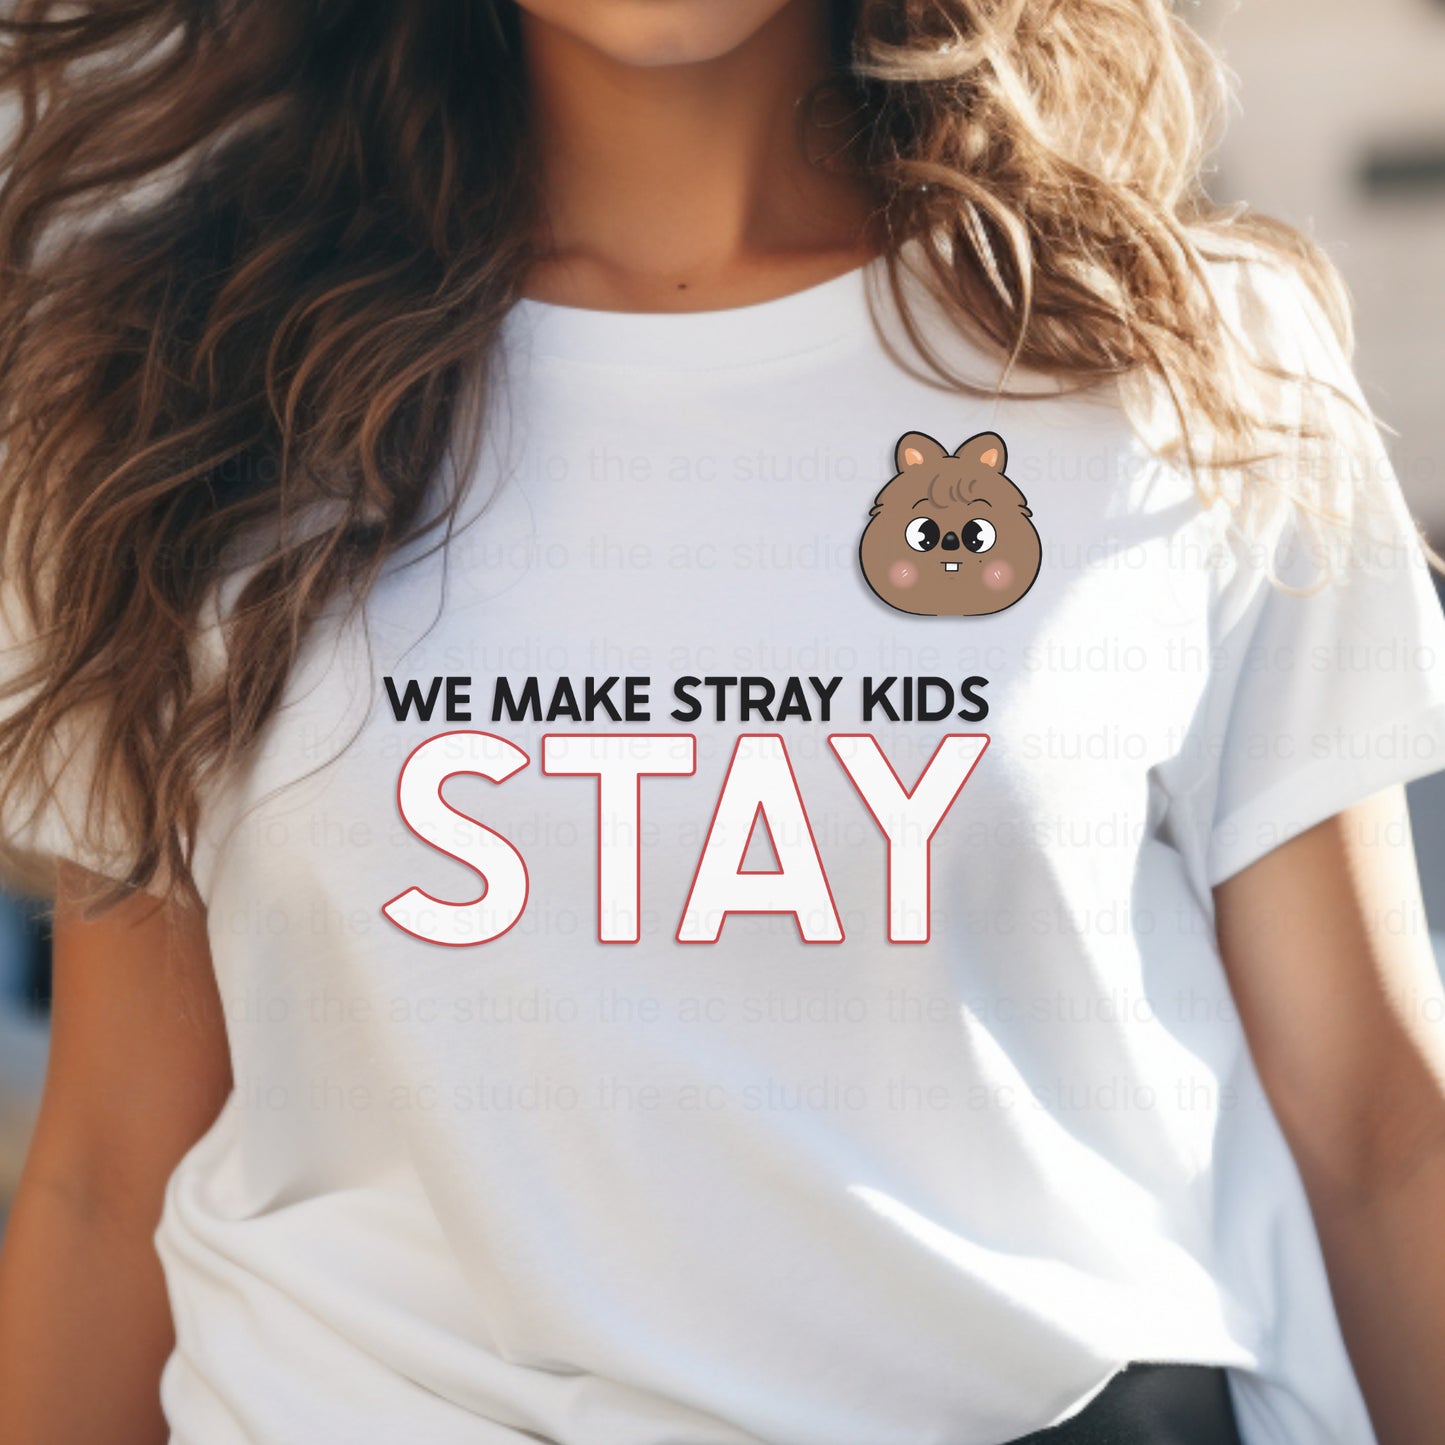 STAY - We Make SK Stay T-Shirt (White)